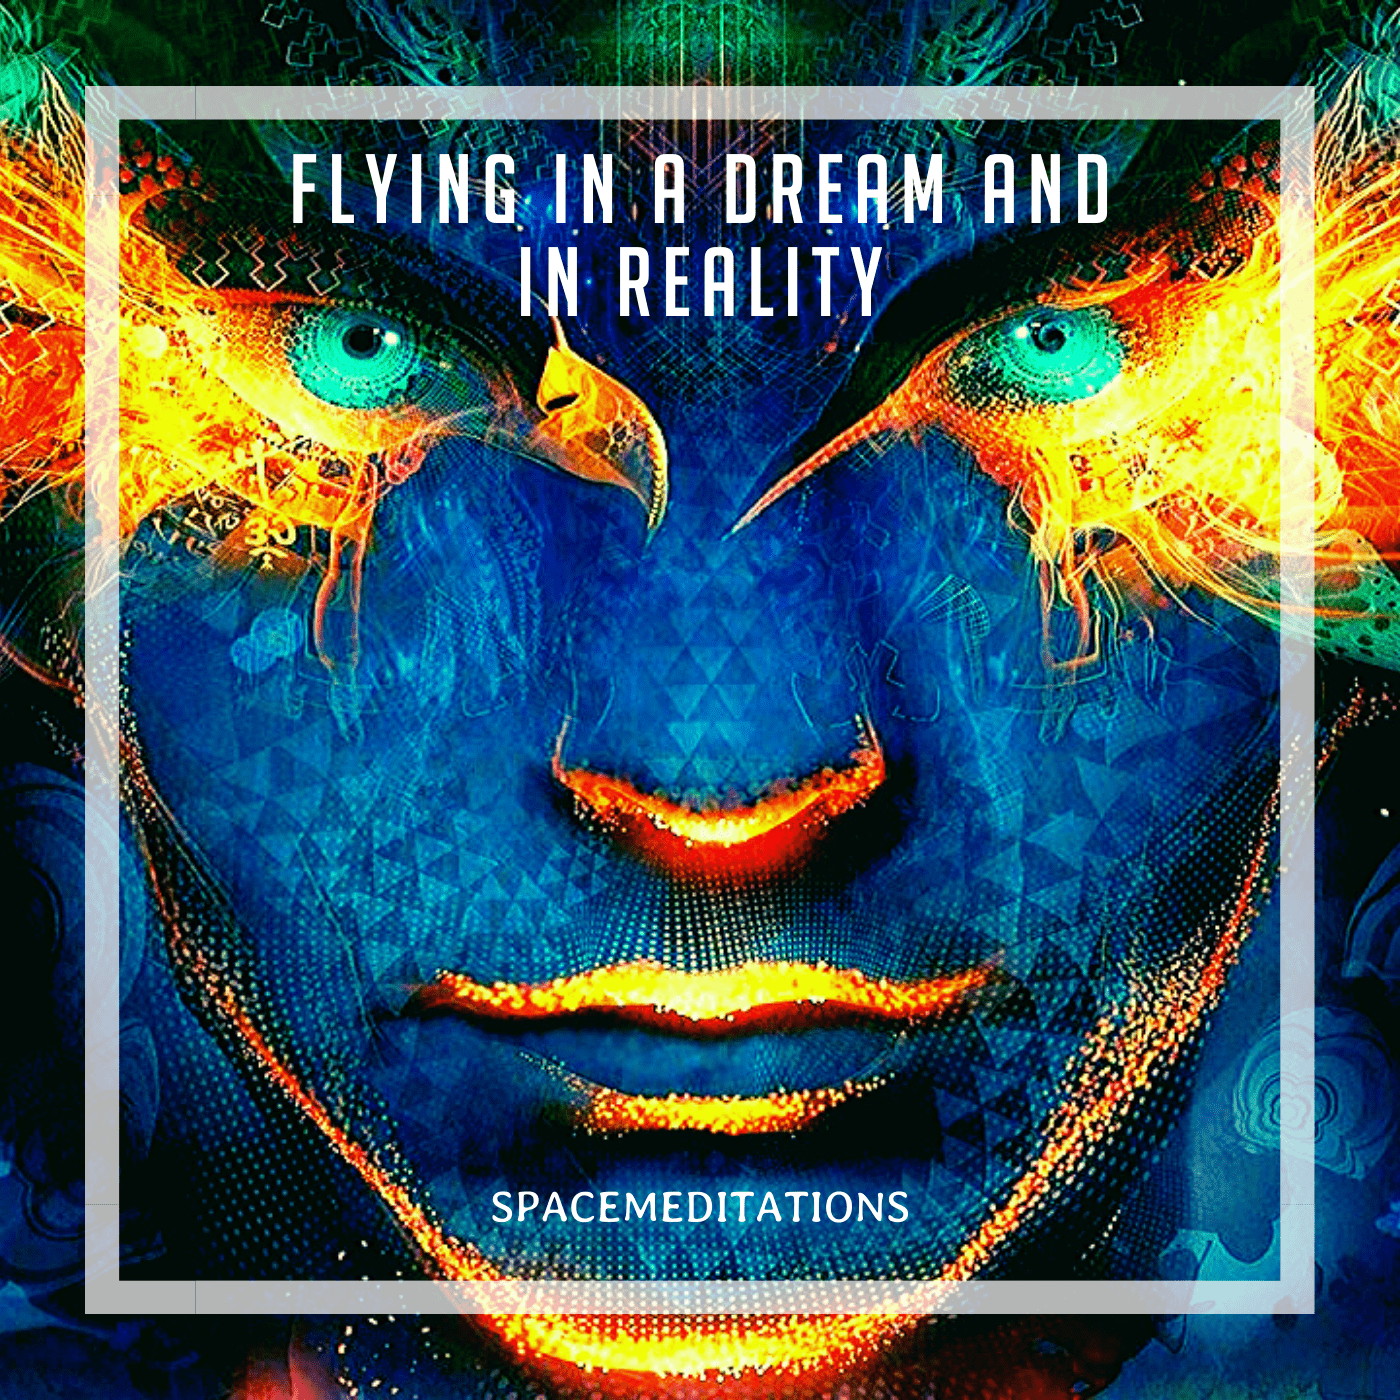 Flying in a dream and in reality. Spacemeditations